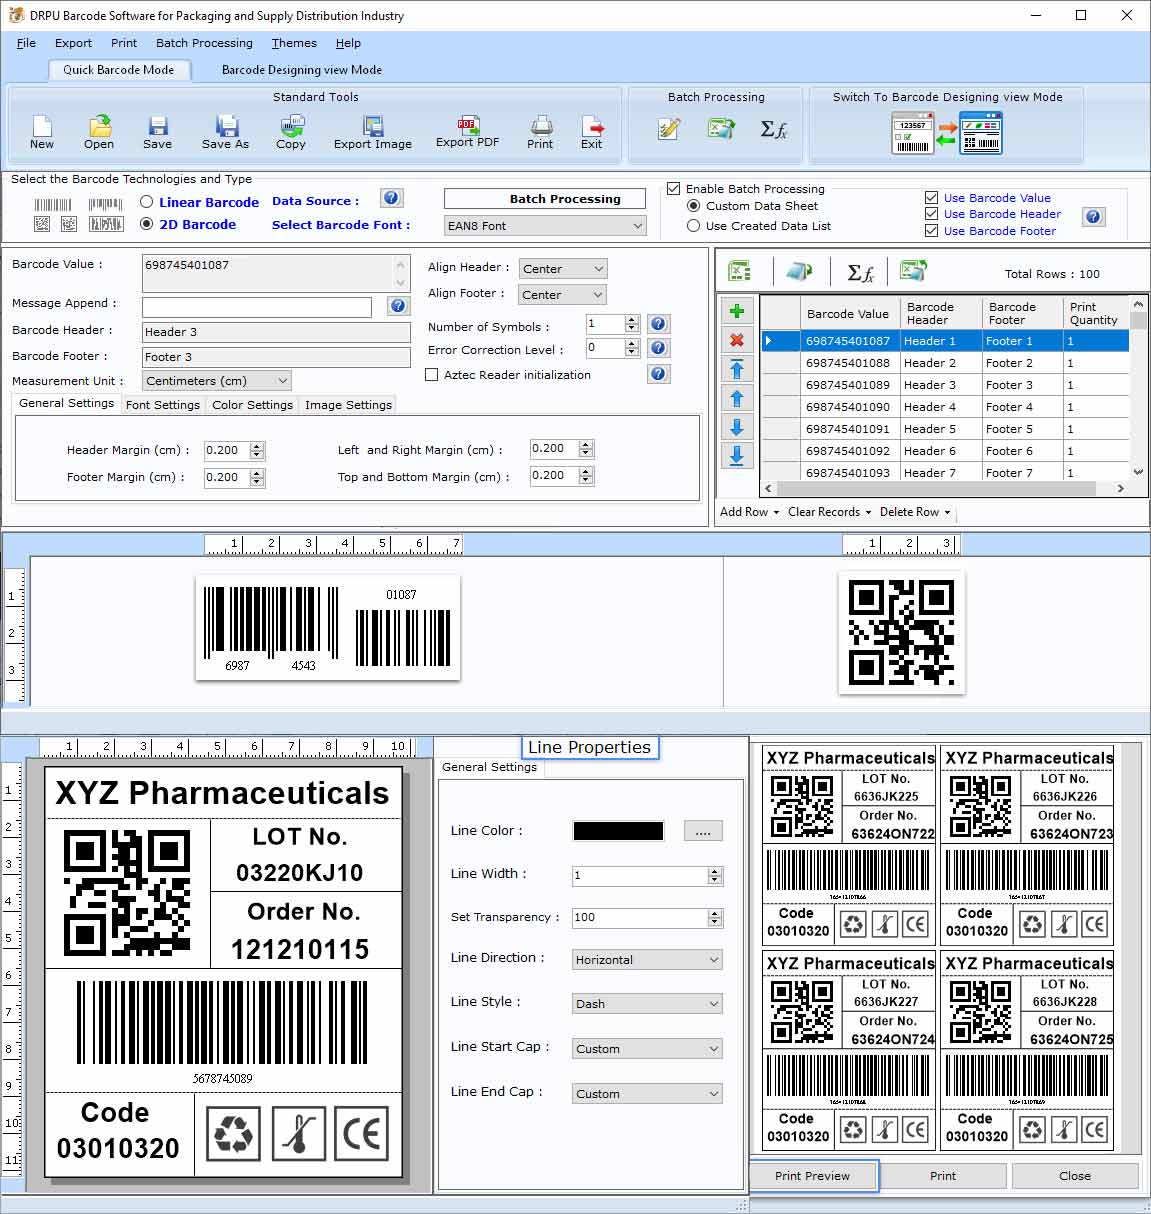 Screenshot of Barcode for Distribution Industry